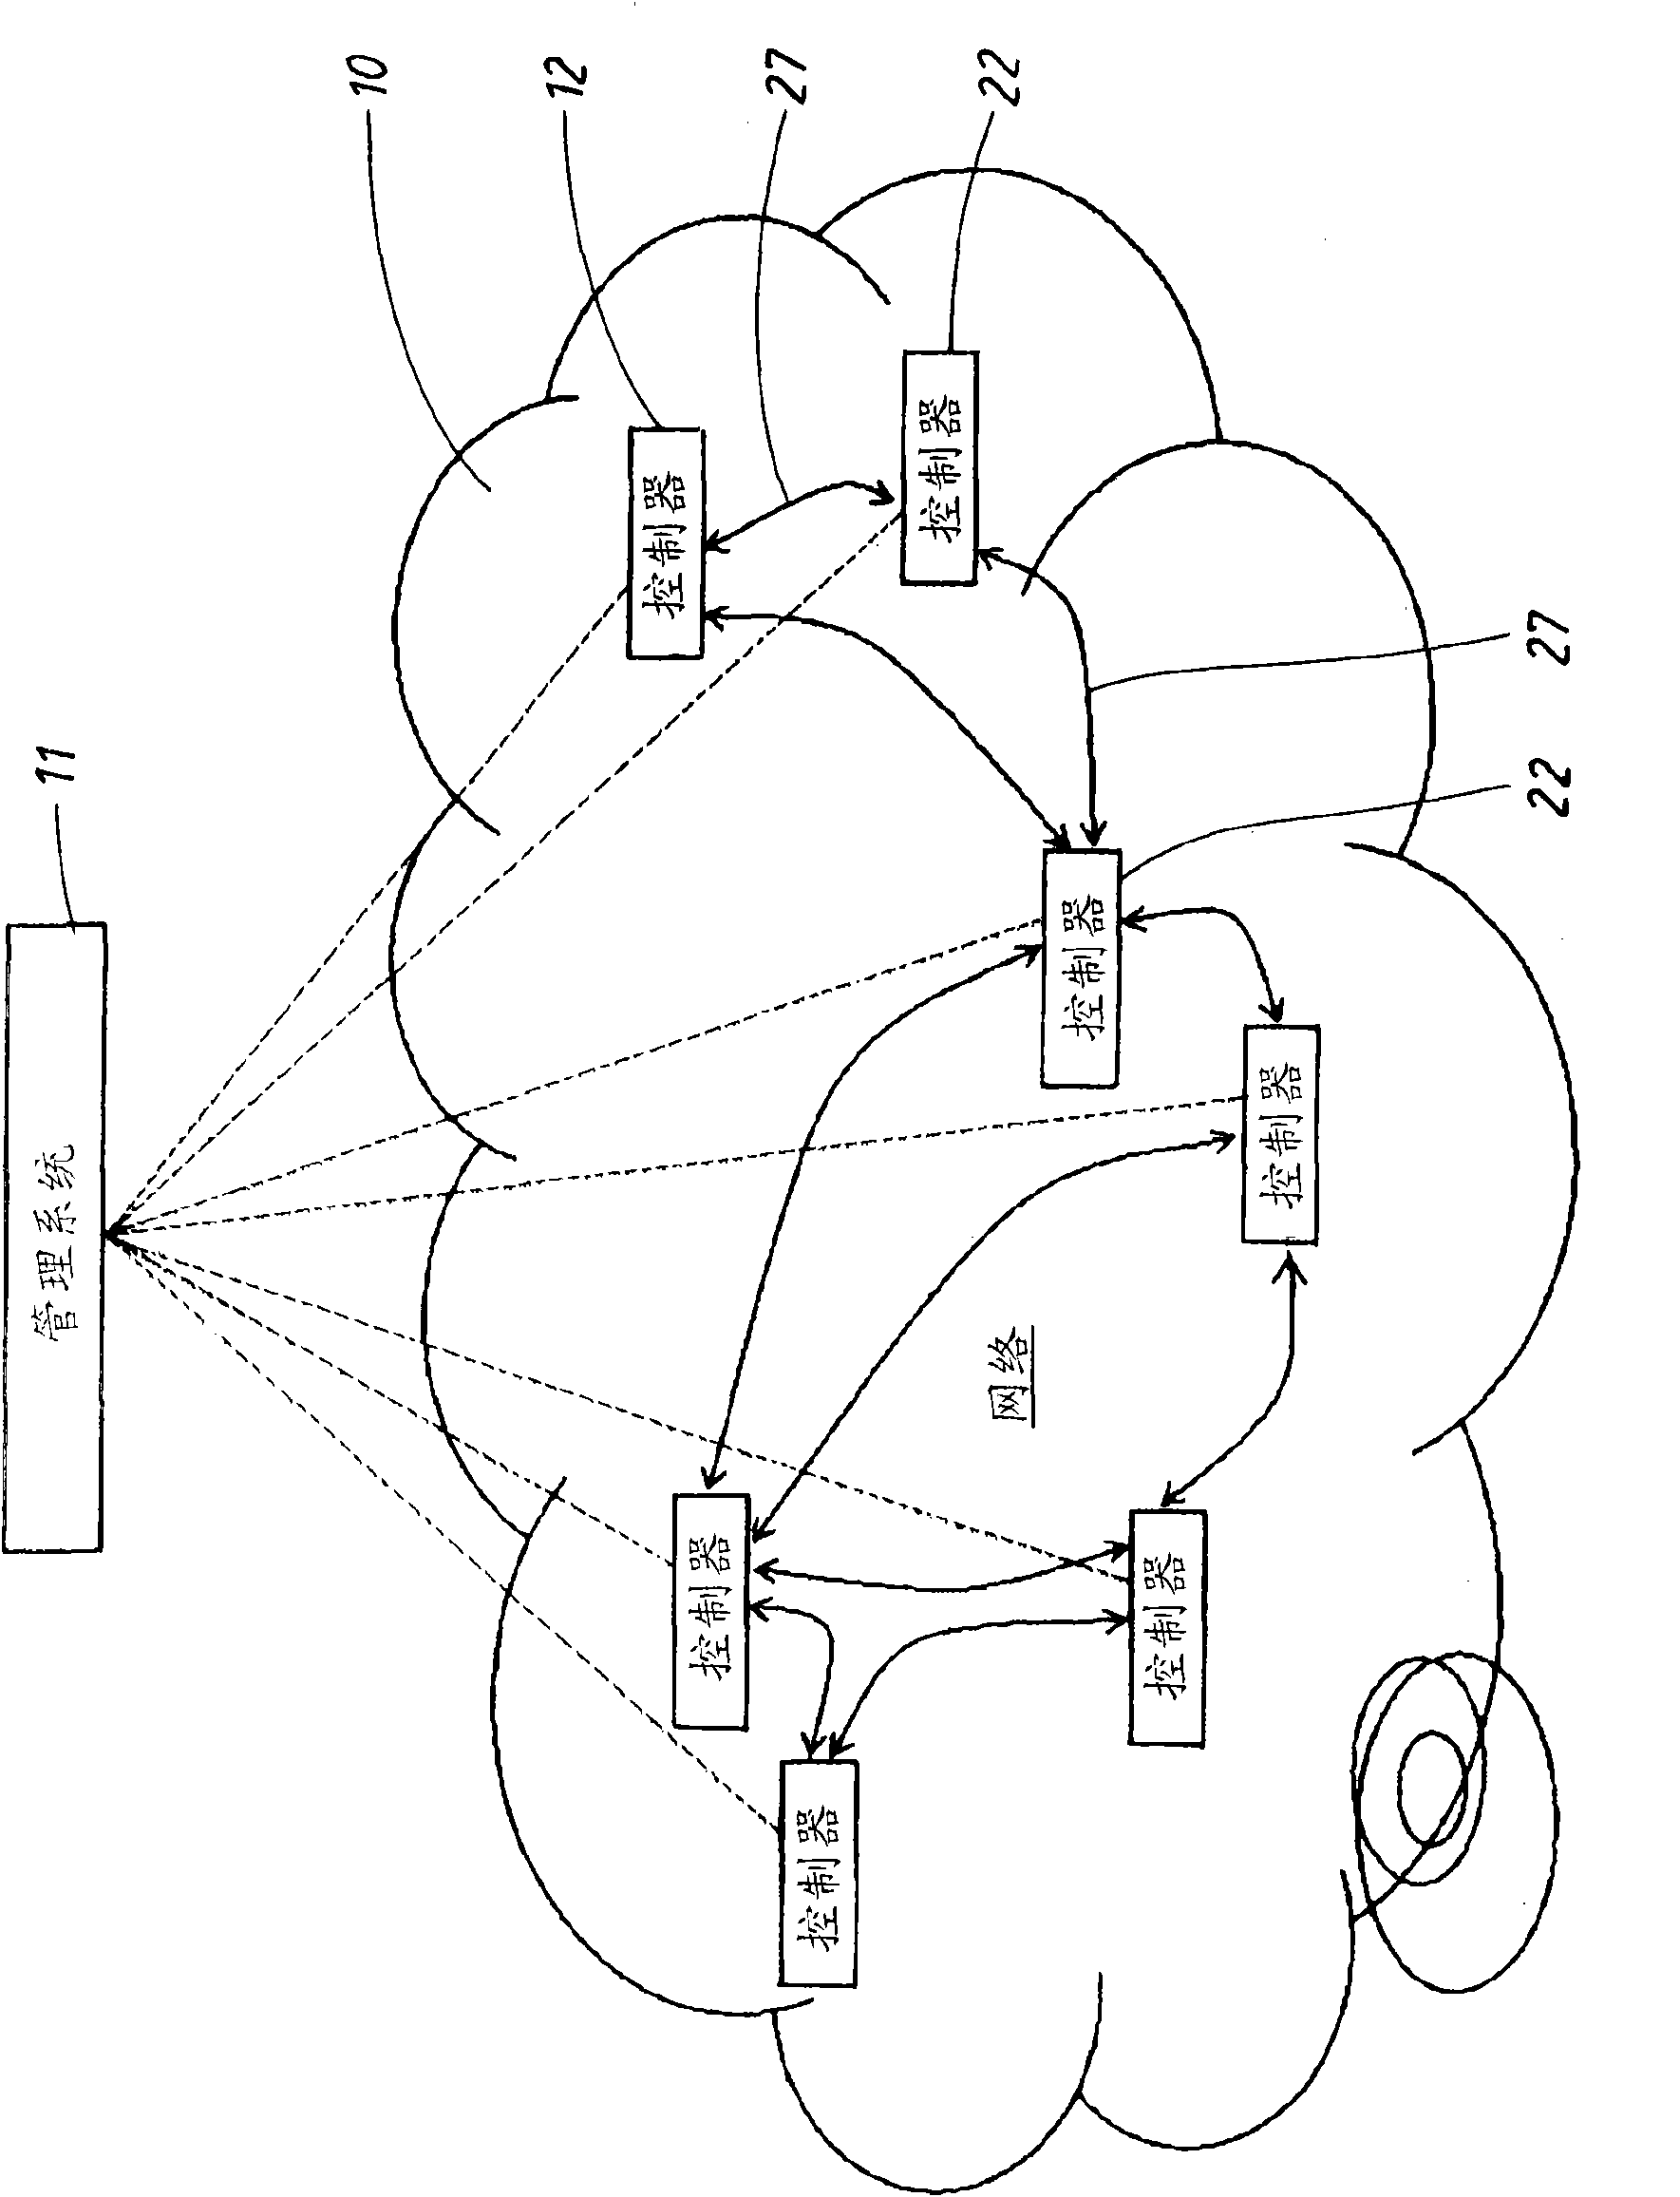 A method for exchanging cell information between networks